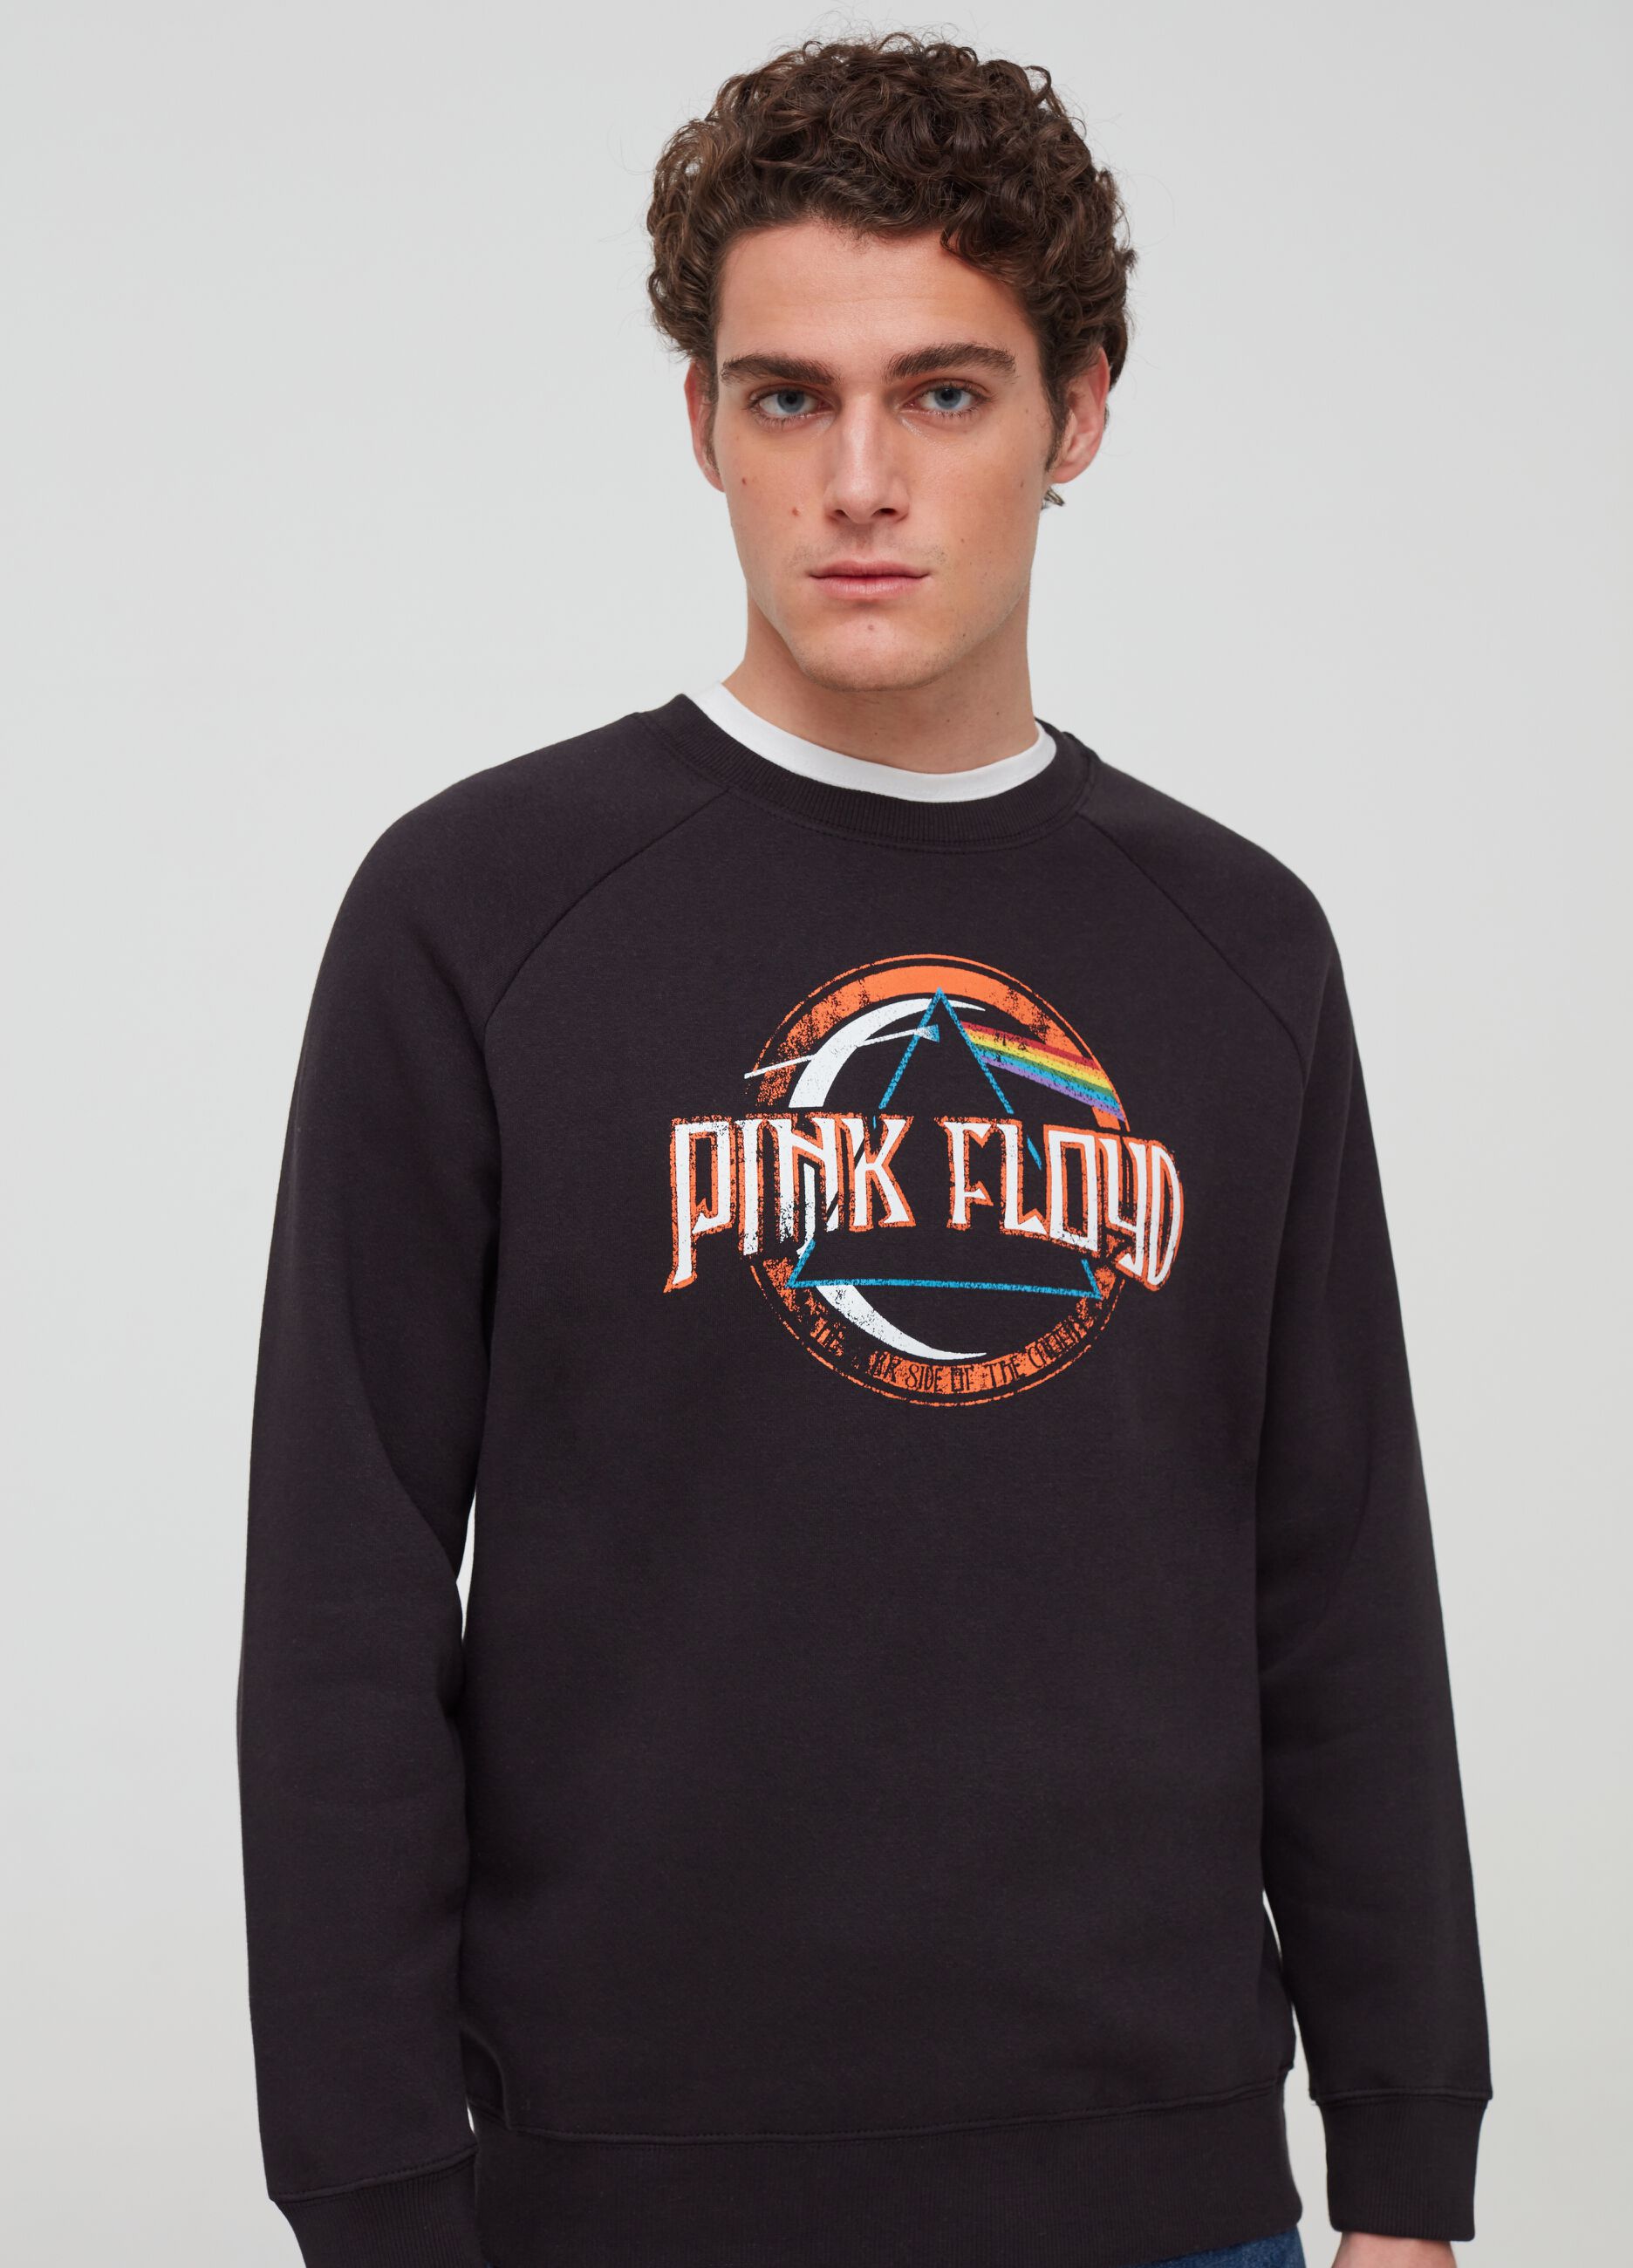 Sweatshirt with raglan sleeves, round neck and lettering print